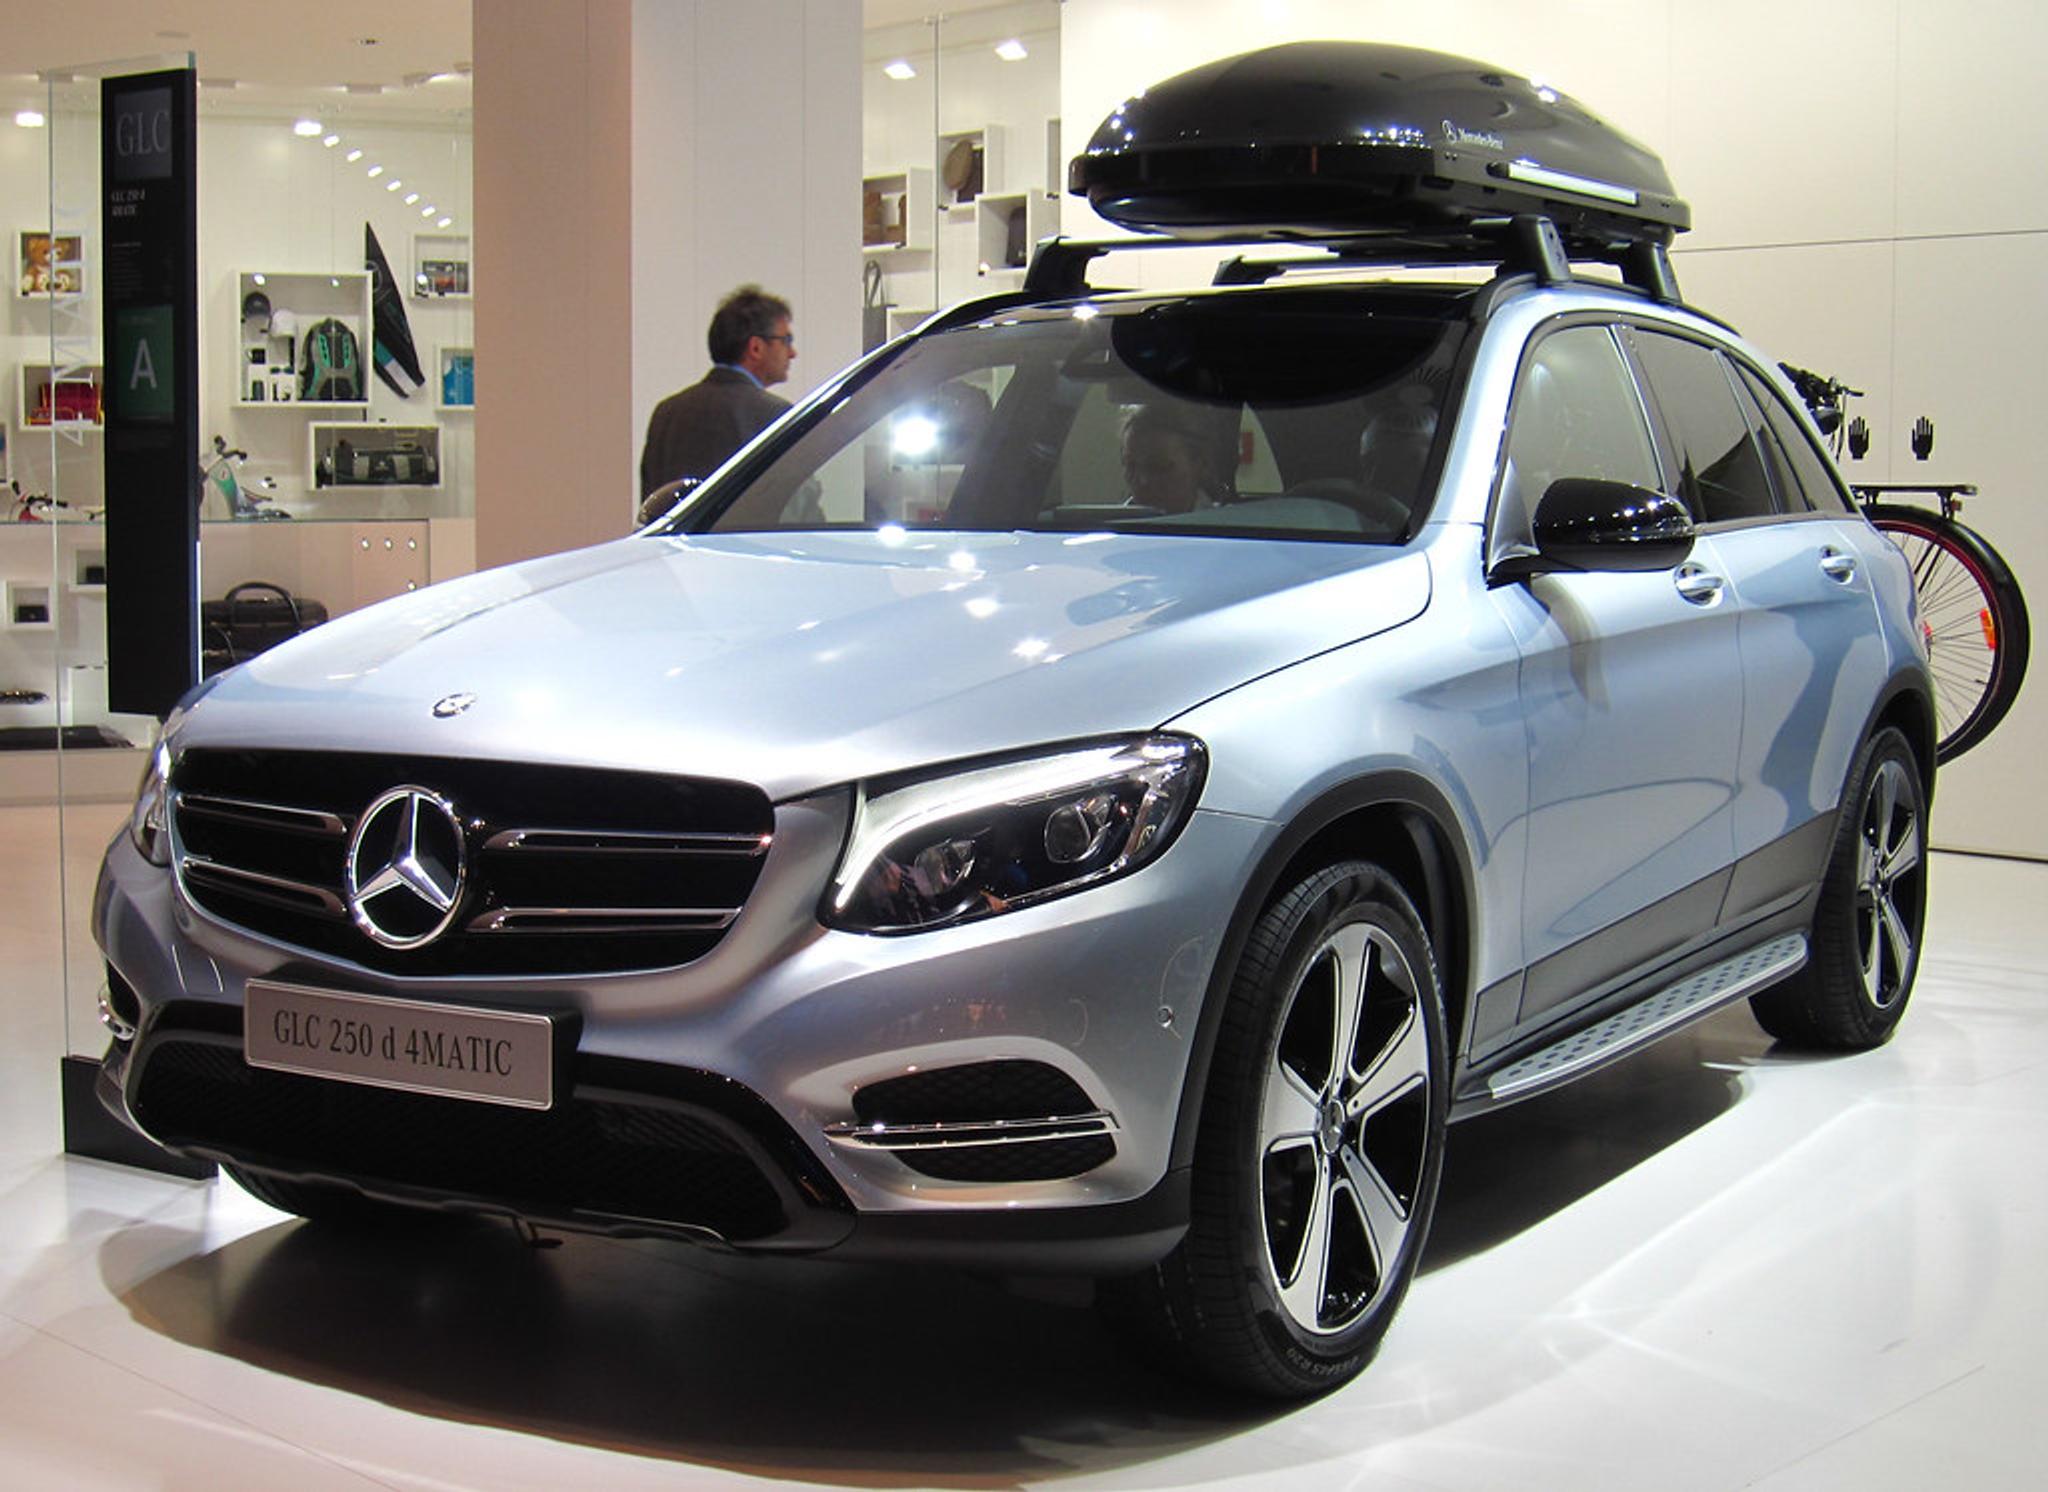 Silver Mercedes Benz GLC 250d 4matic with a roof rack